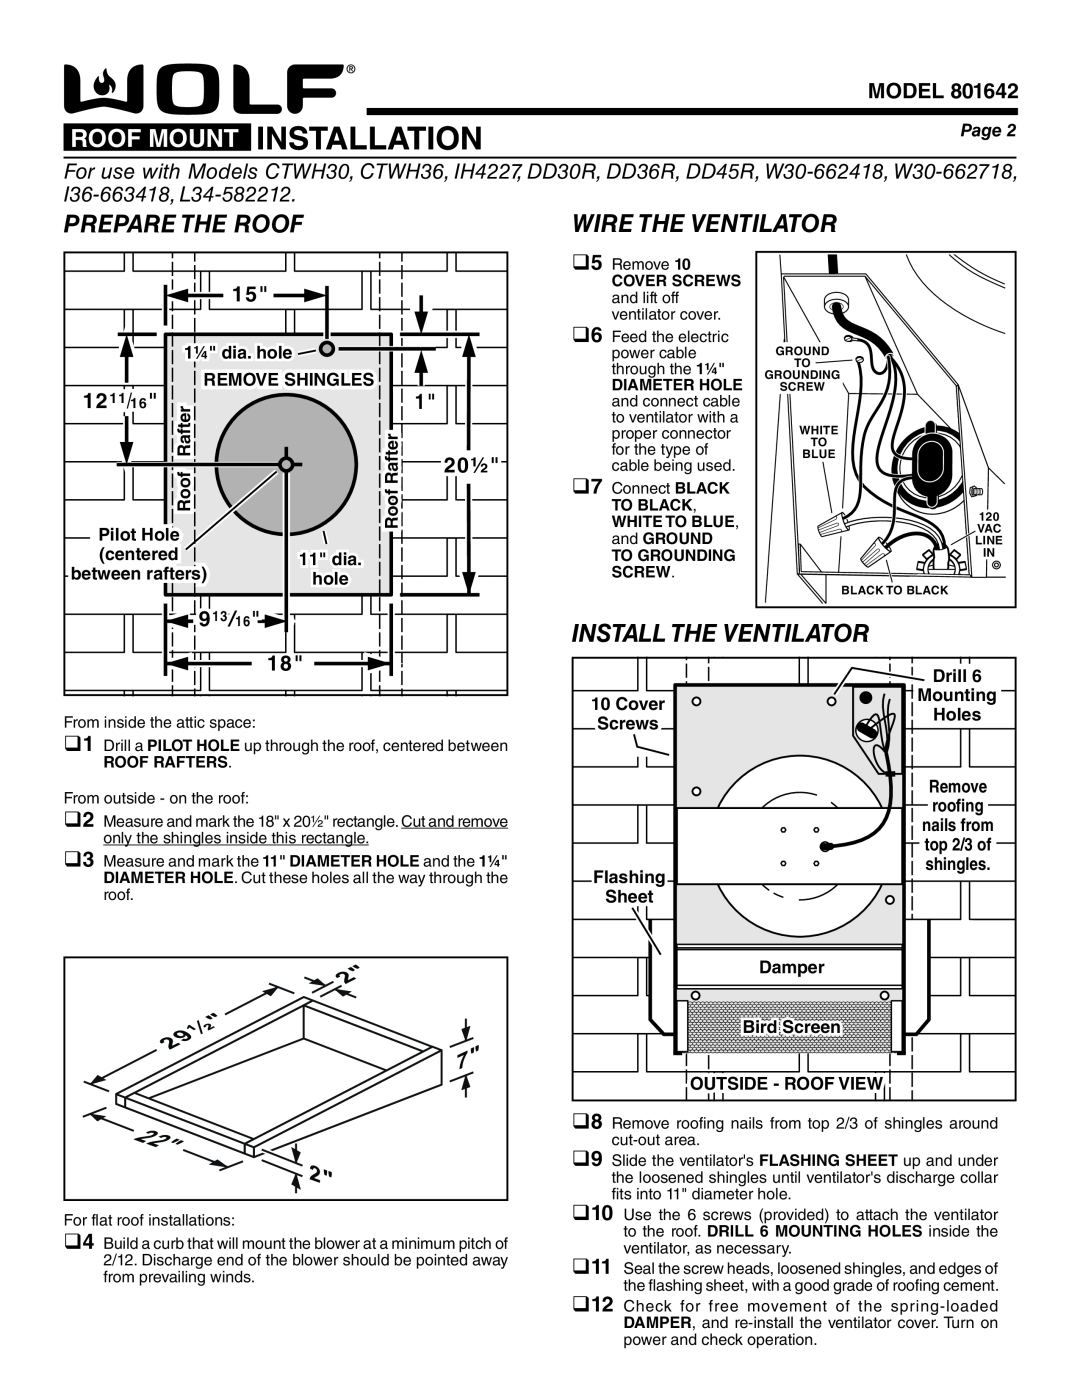 Wolf Appliance Company 801640 Roof Mount Installation, 1211/16, Prepare The Roof, Wire The Ventilator, Model, Page 